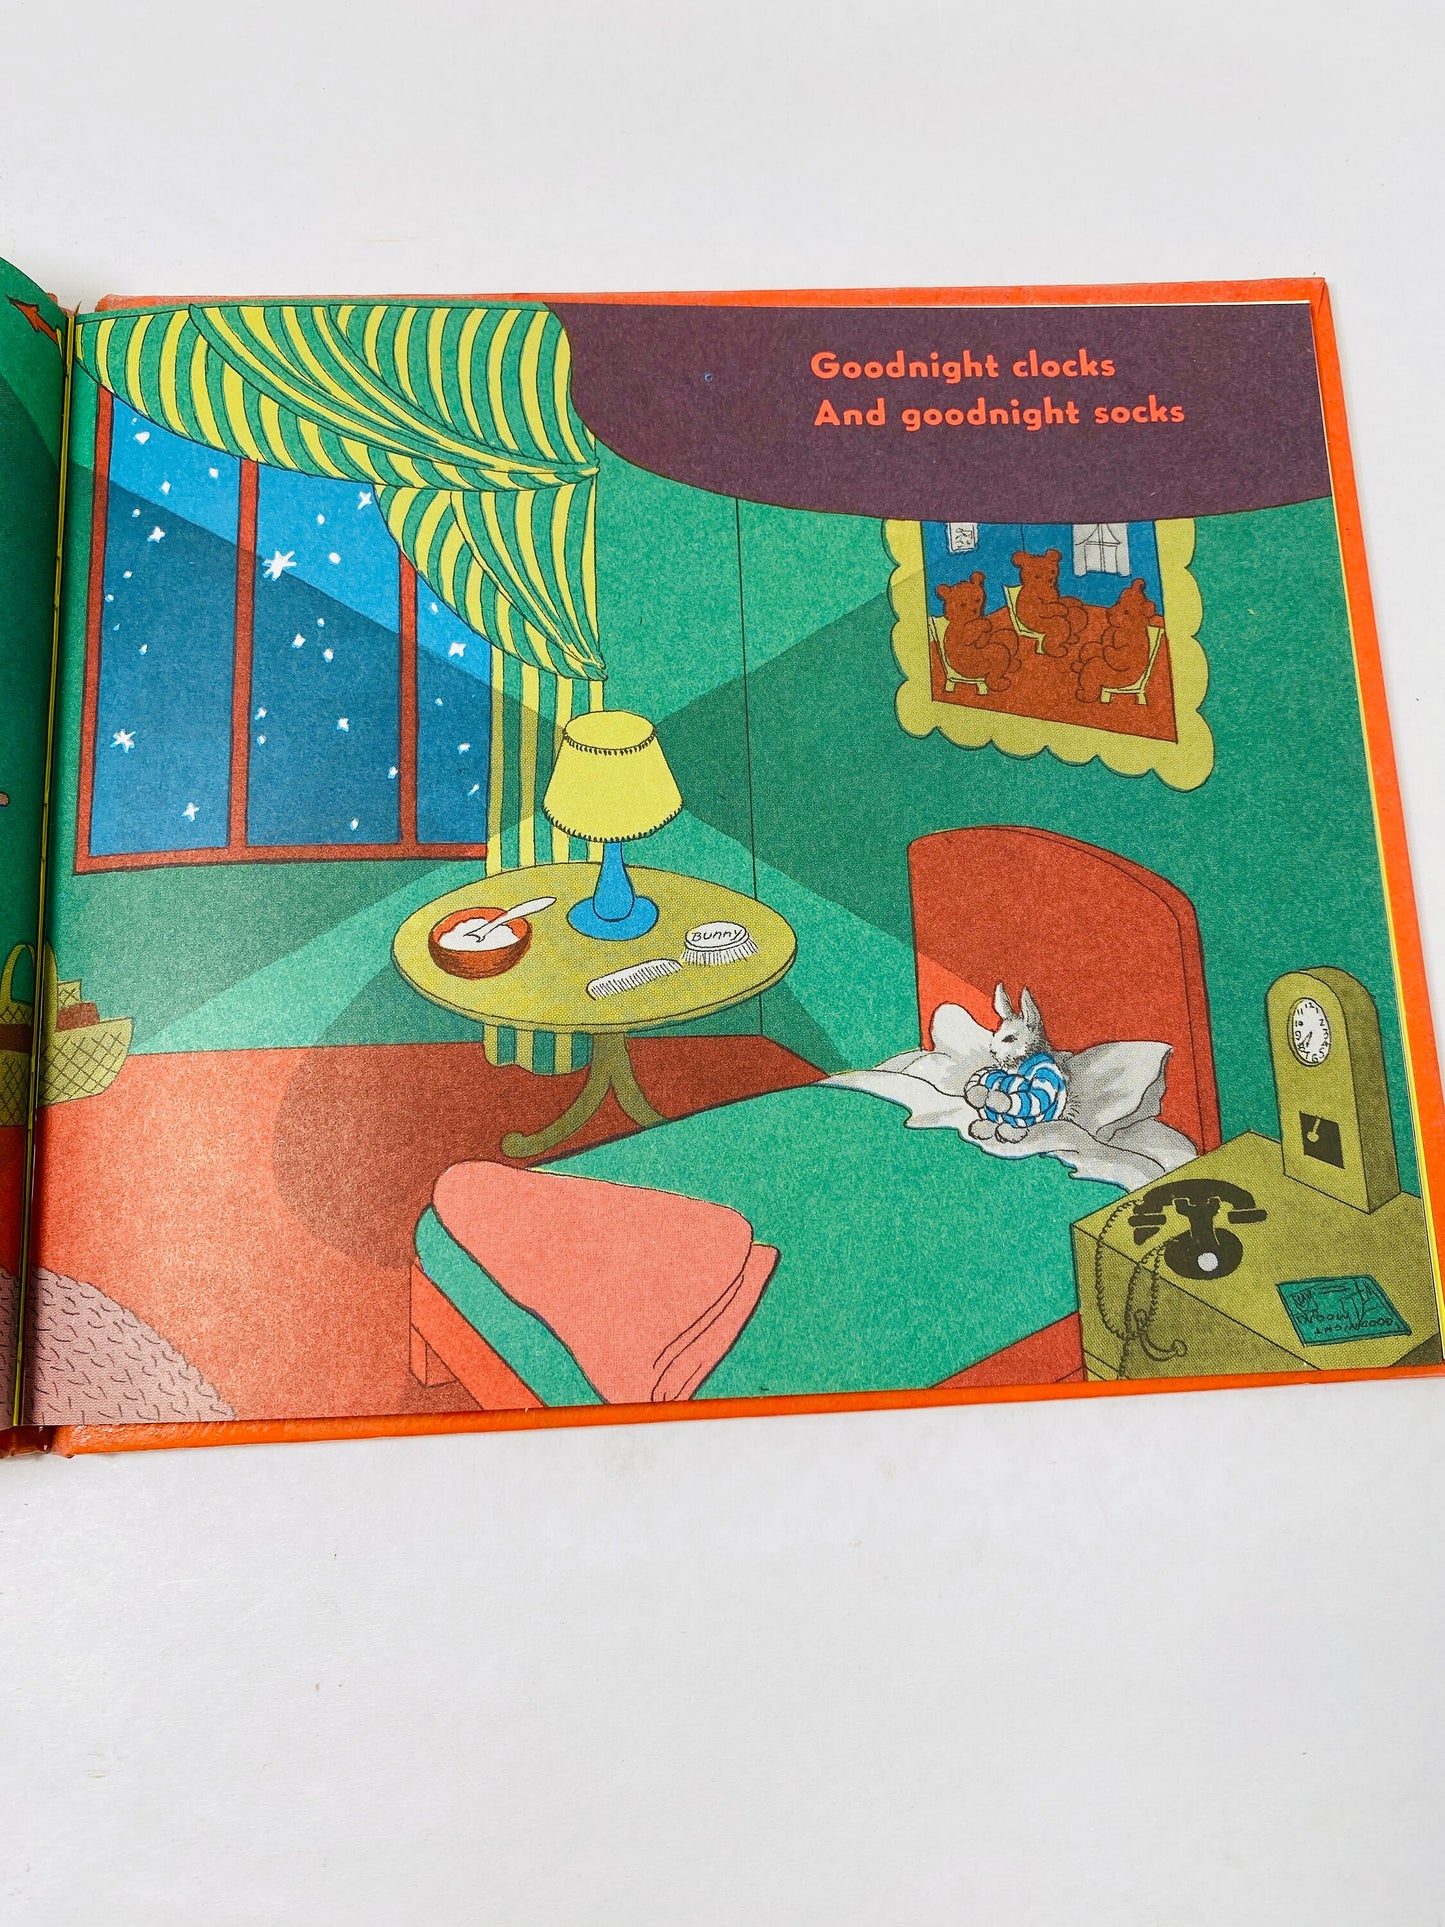 Goodnight Moon by Margaret Wise Brown EARLY PRINTING vintage book circa 1947 Beautiful story illustrated by Clement Hurd